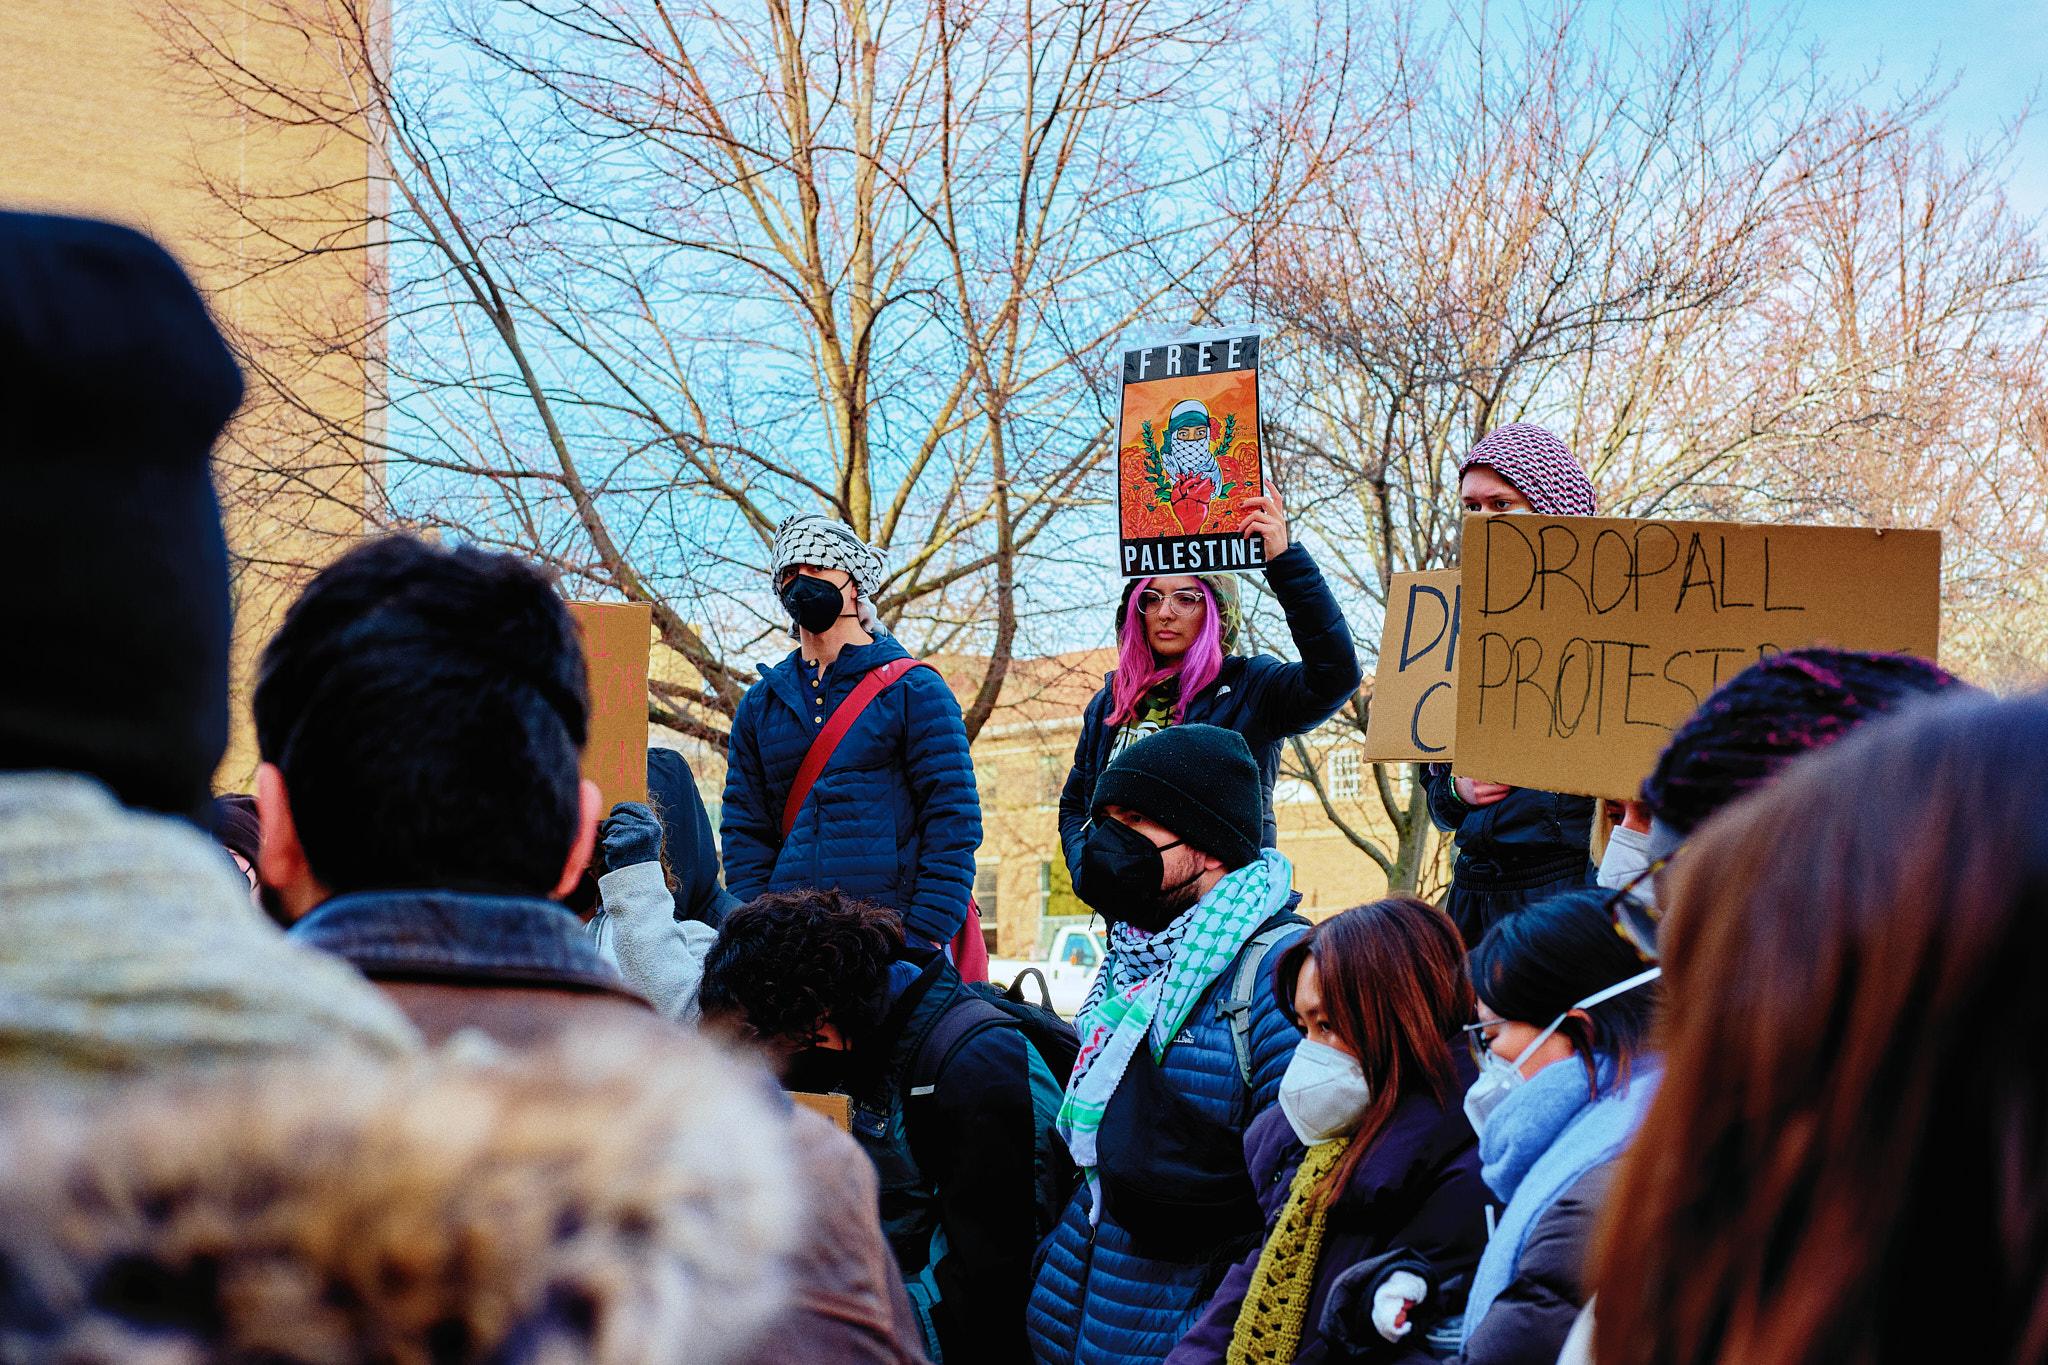 Speakout Against UWPD and Weapons Manufacturers on Campus